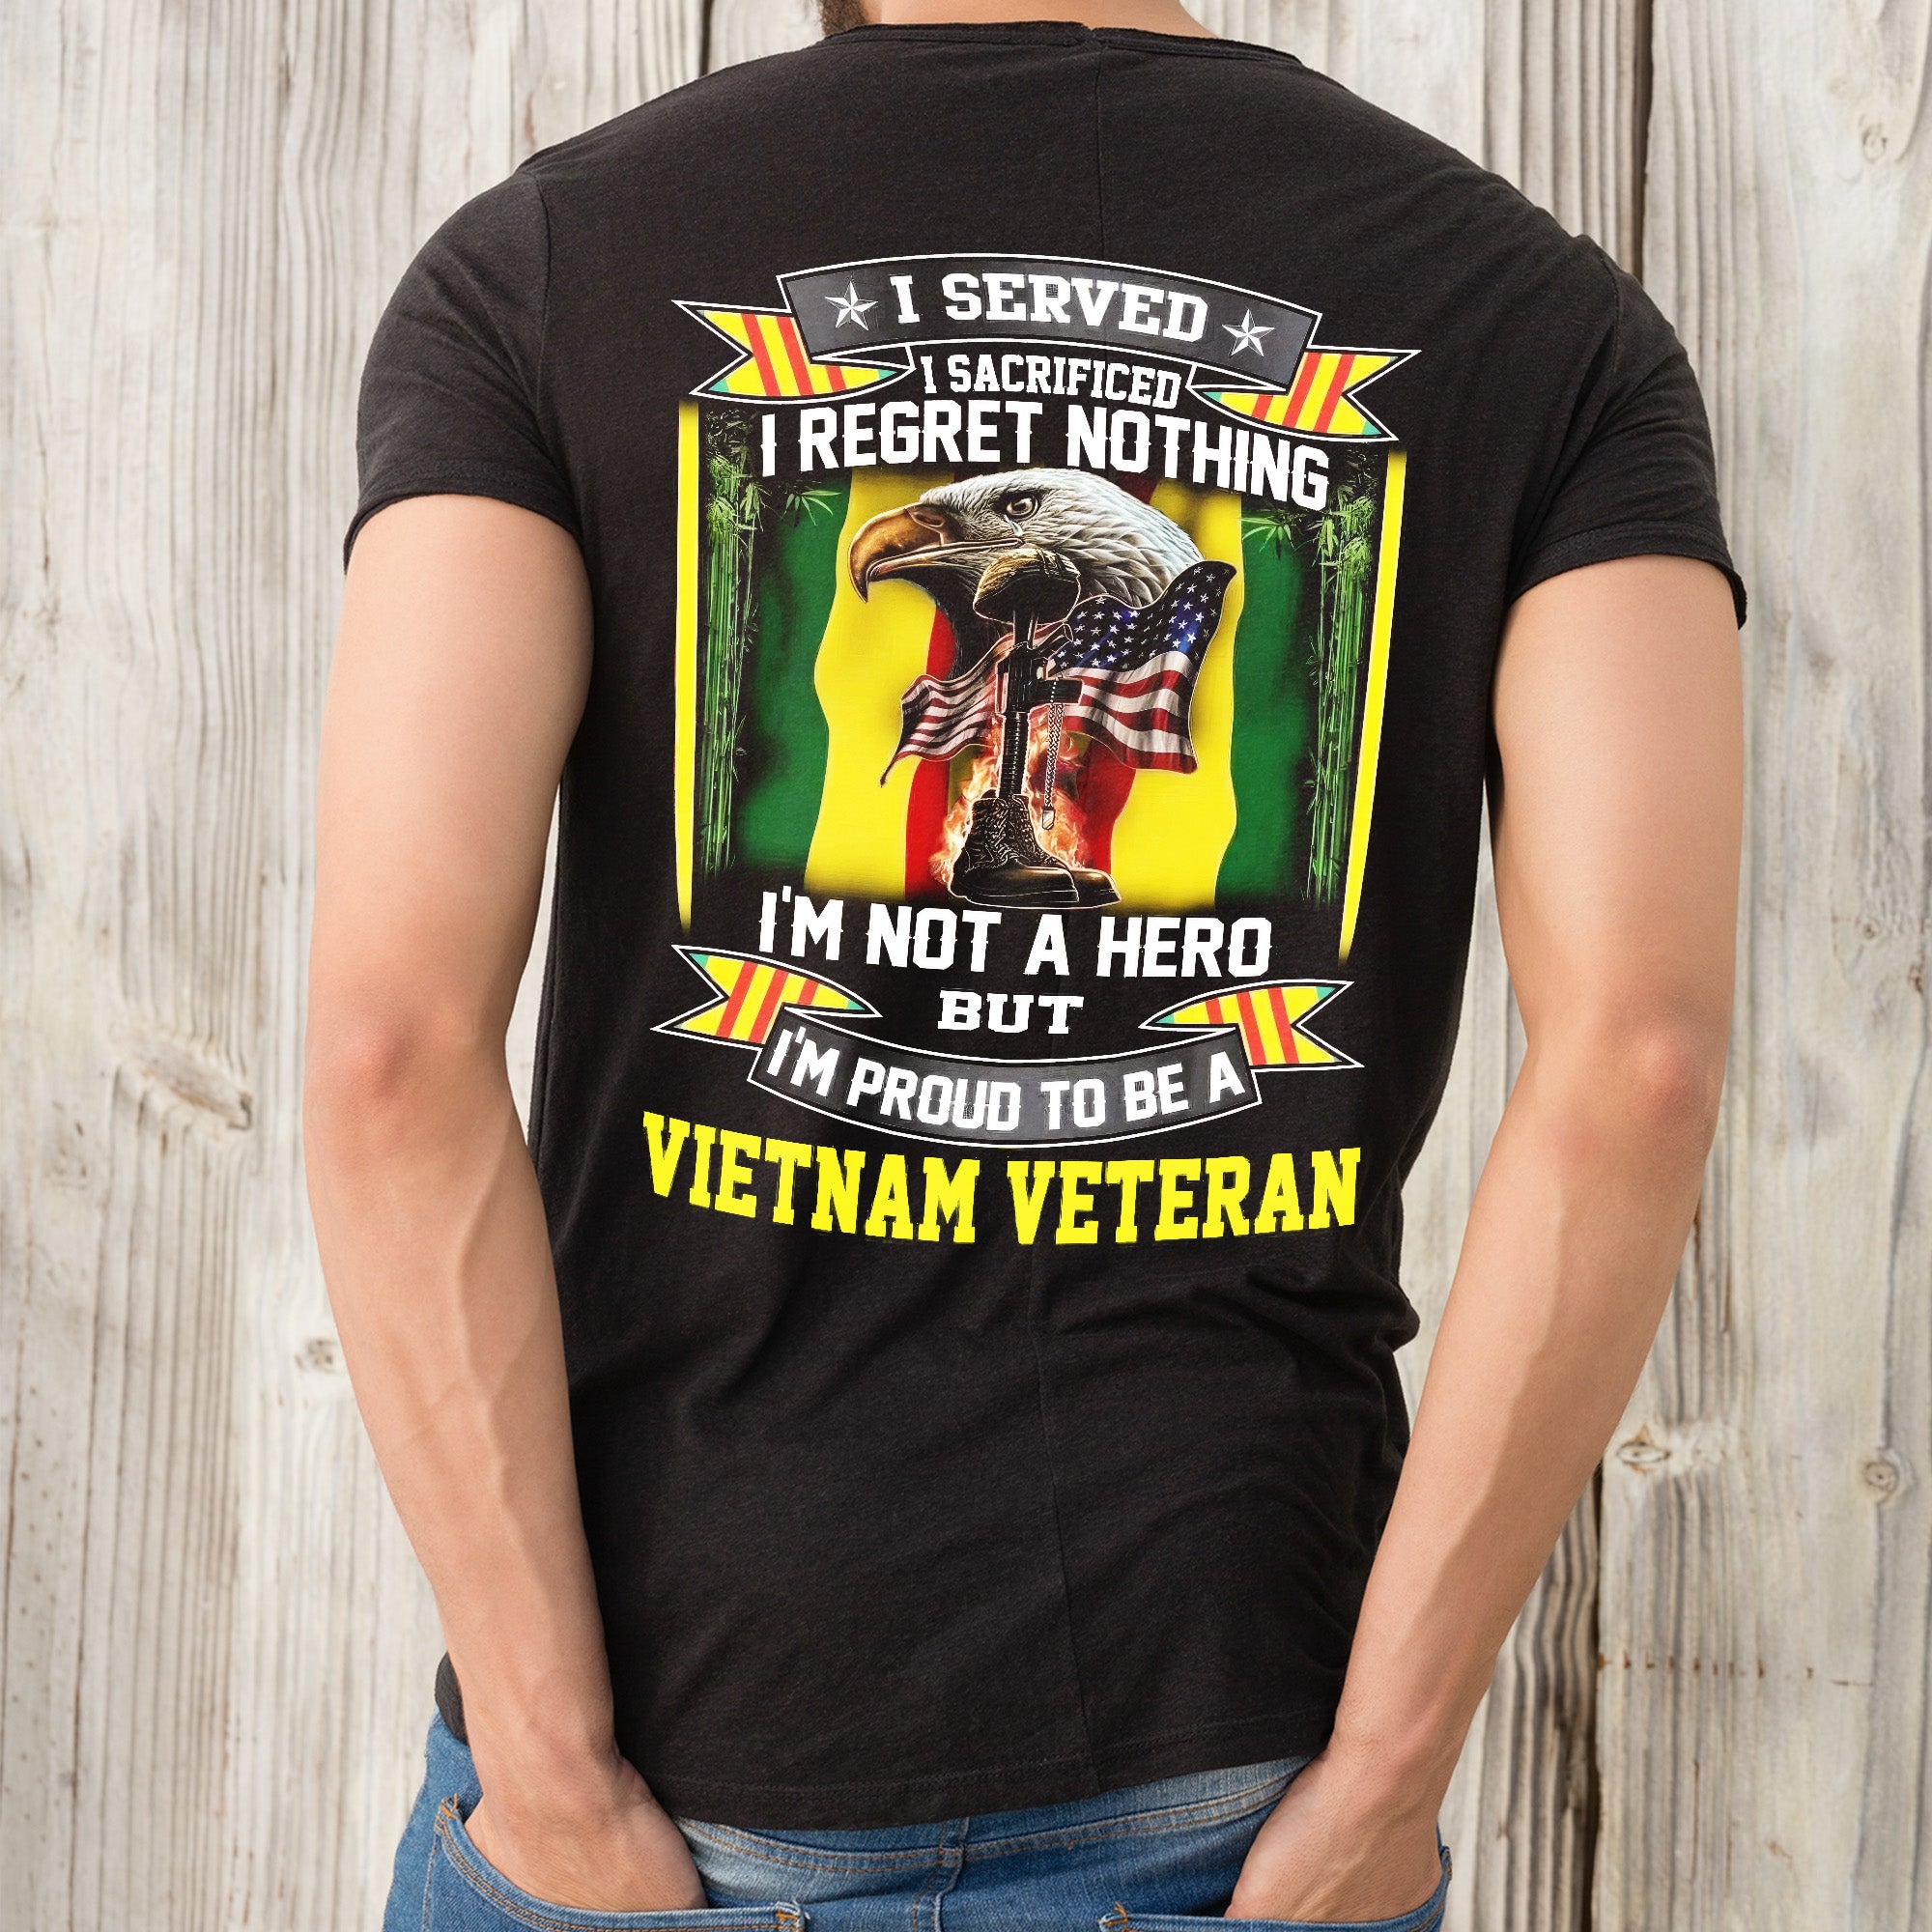 I Regret Nothing I Am Not A Hero But I Am Proud To Be A Vietnam Veteran - Personalized Vietnam Veteran T-Shirt, Gift For Veterans